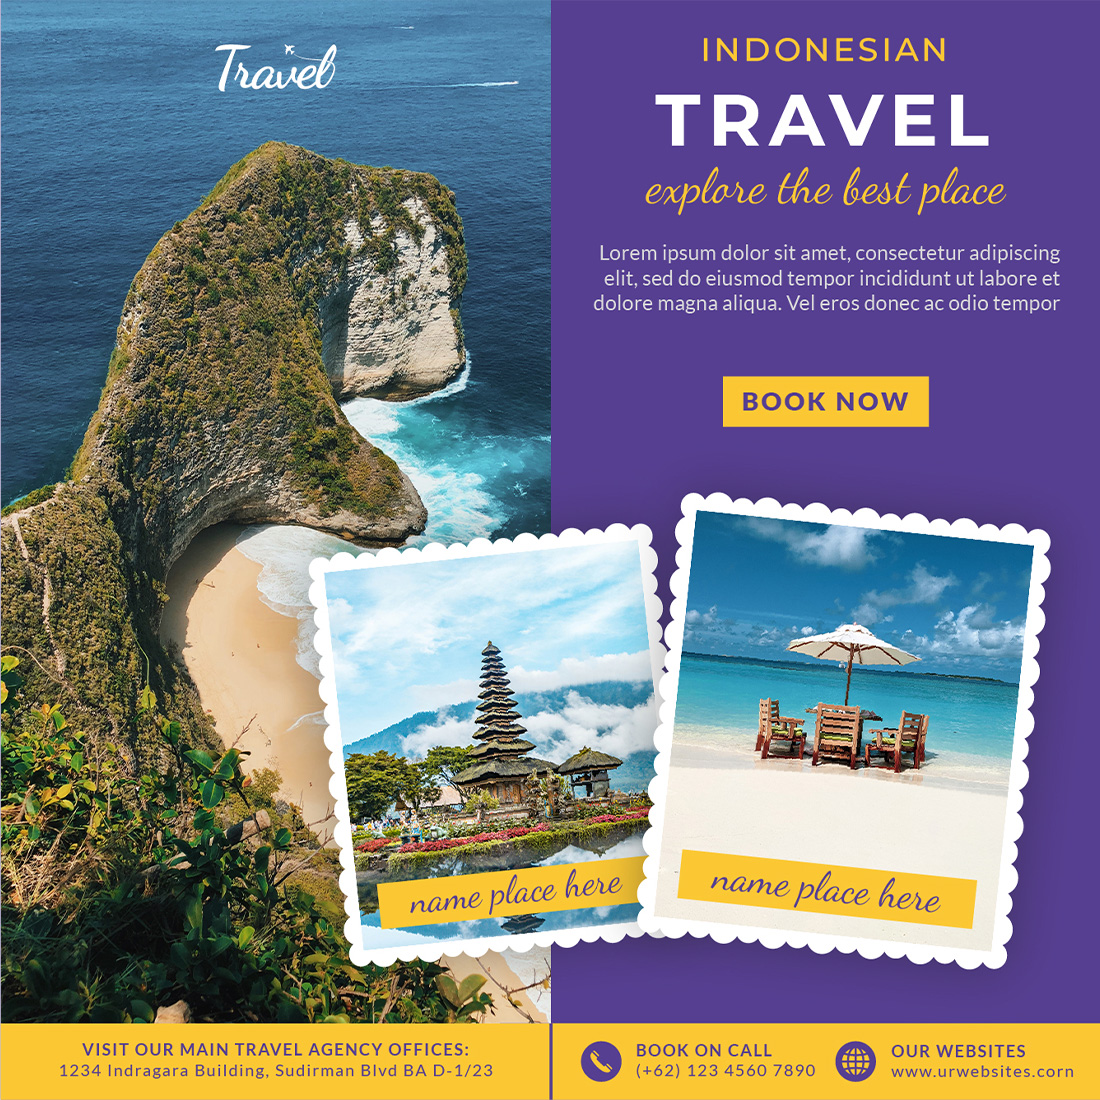 Travel & Tourism Social Media Post Templates Indonesian example.